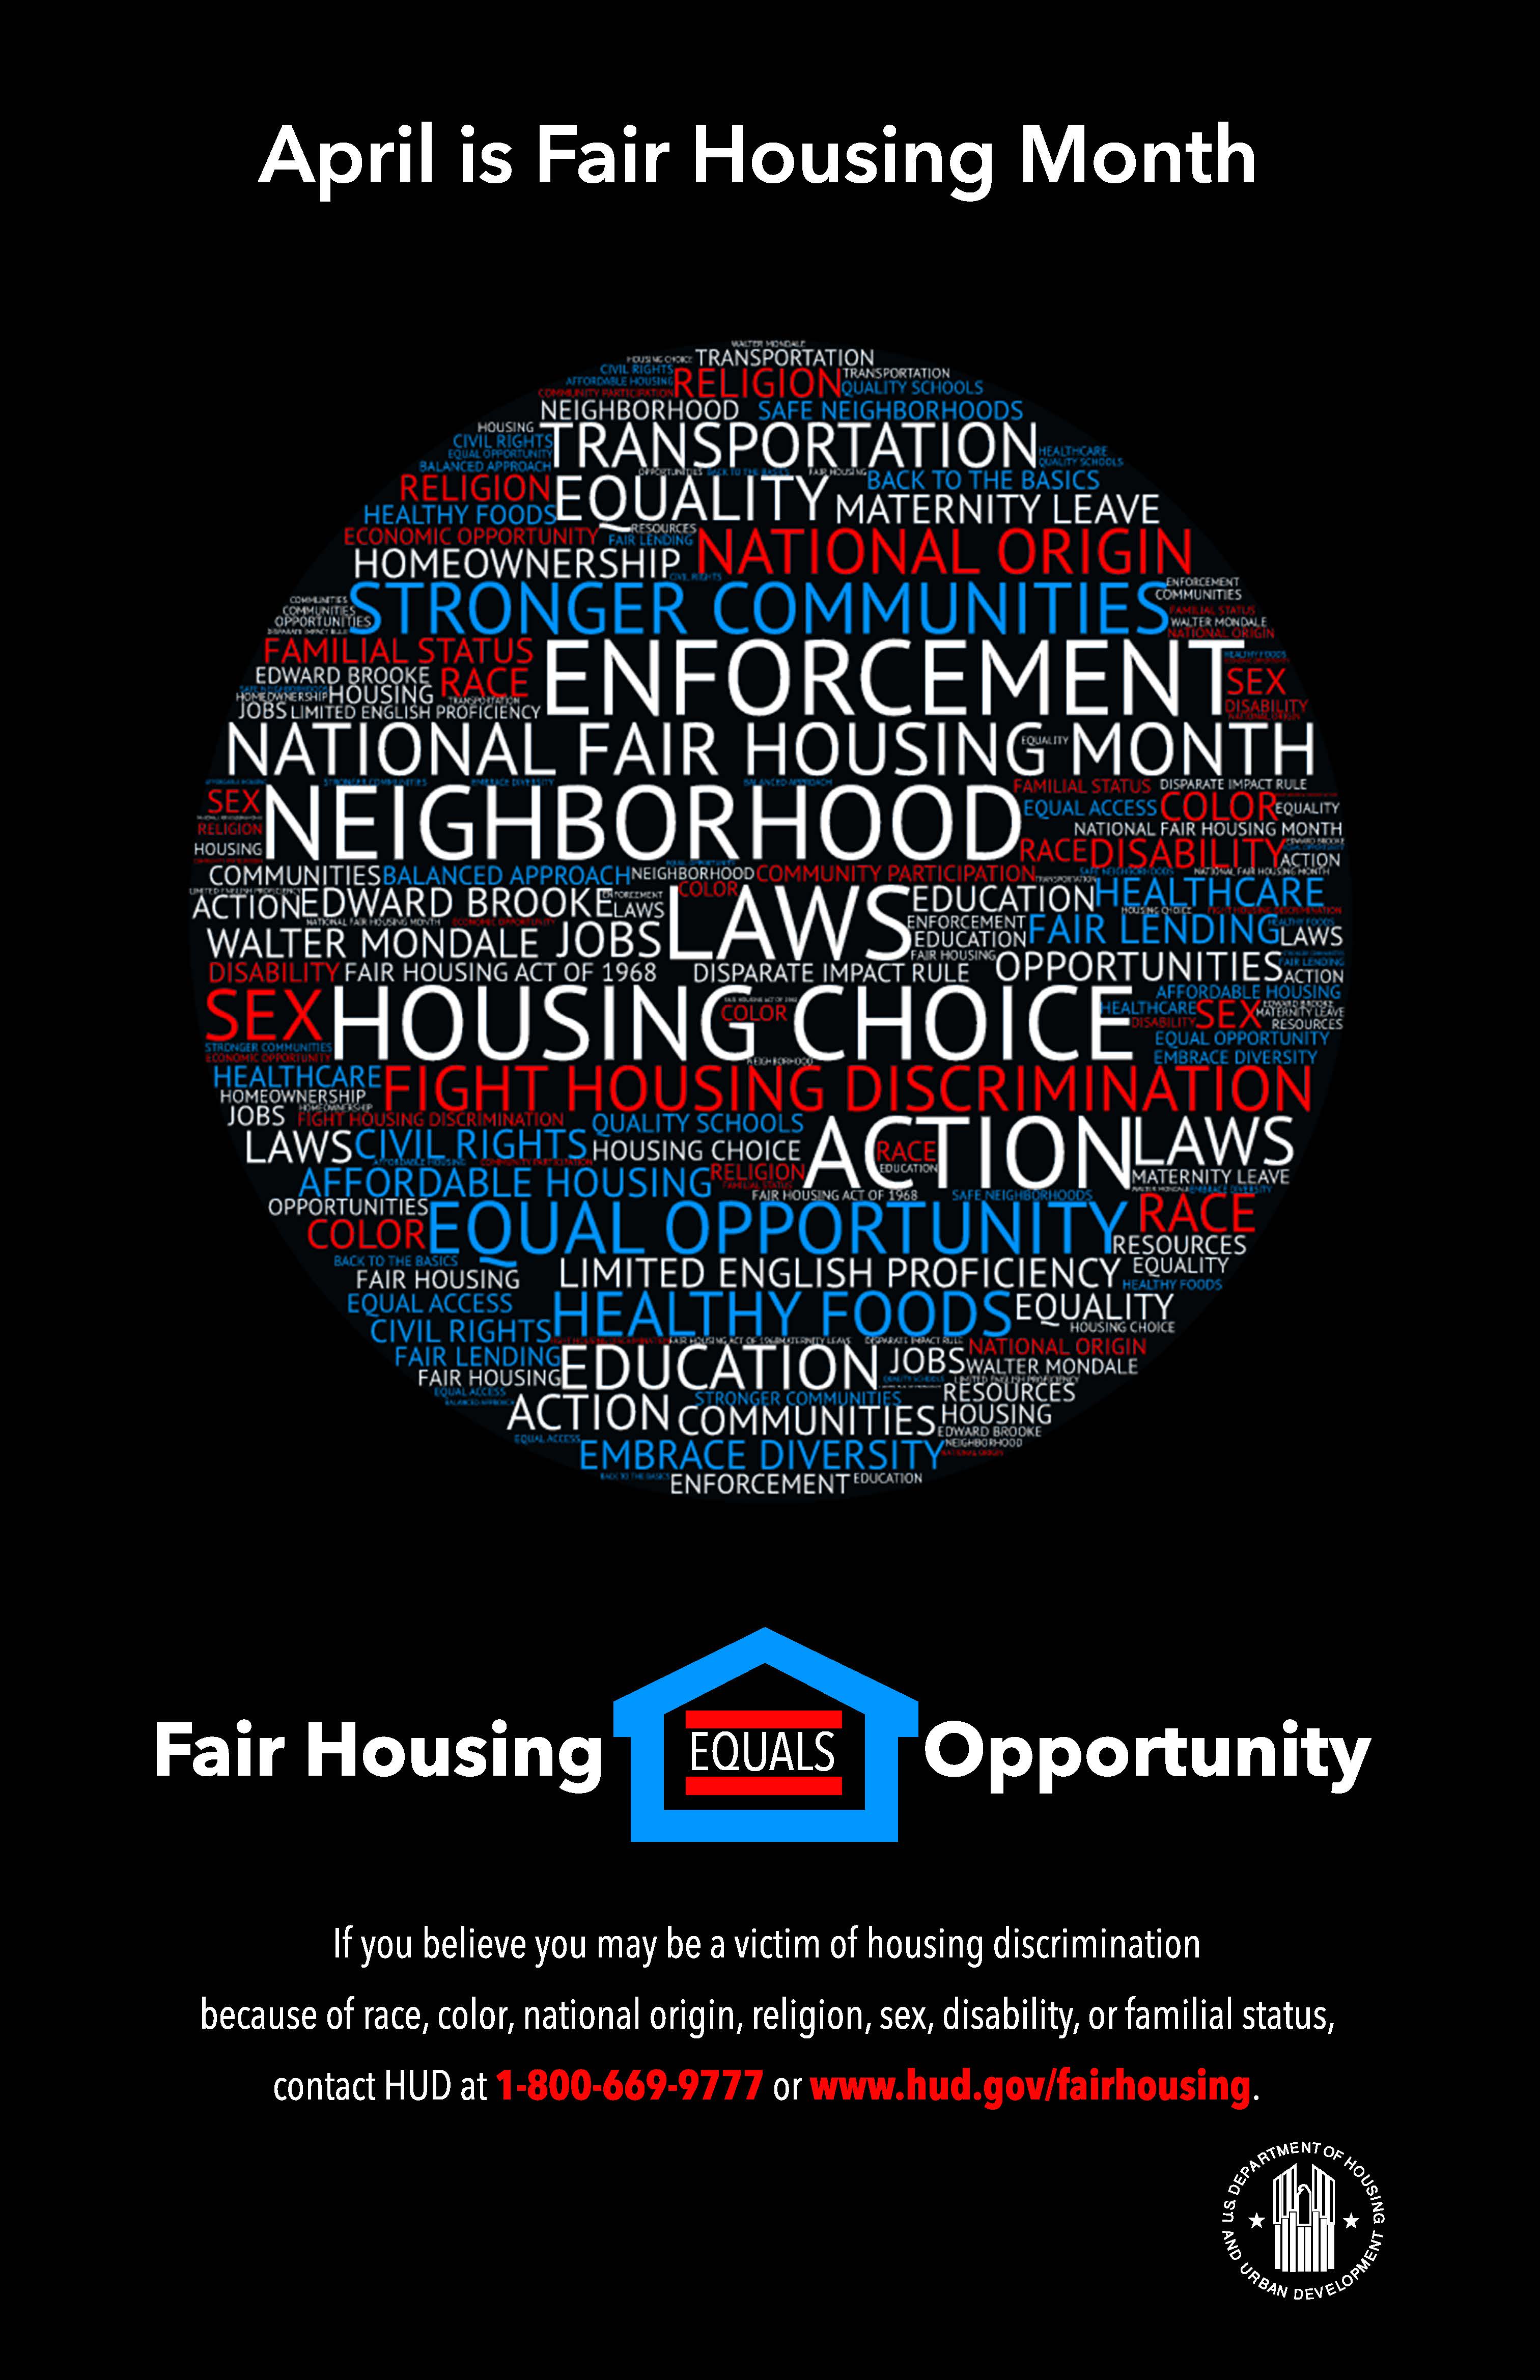 Join the ERC and Partners in Celebrating Fair Housing Month at These